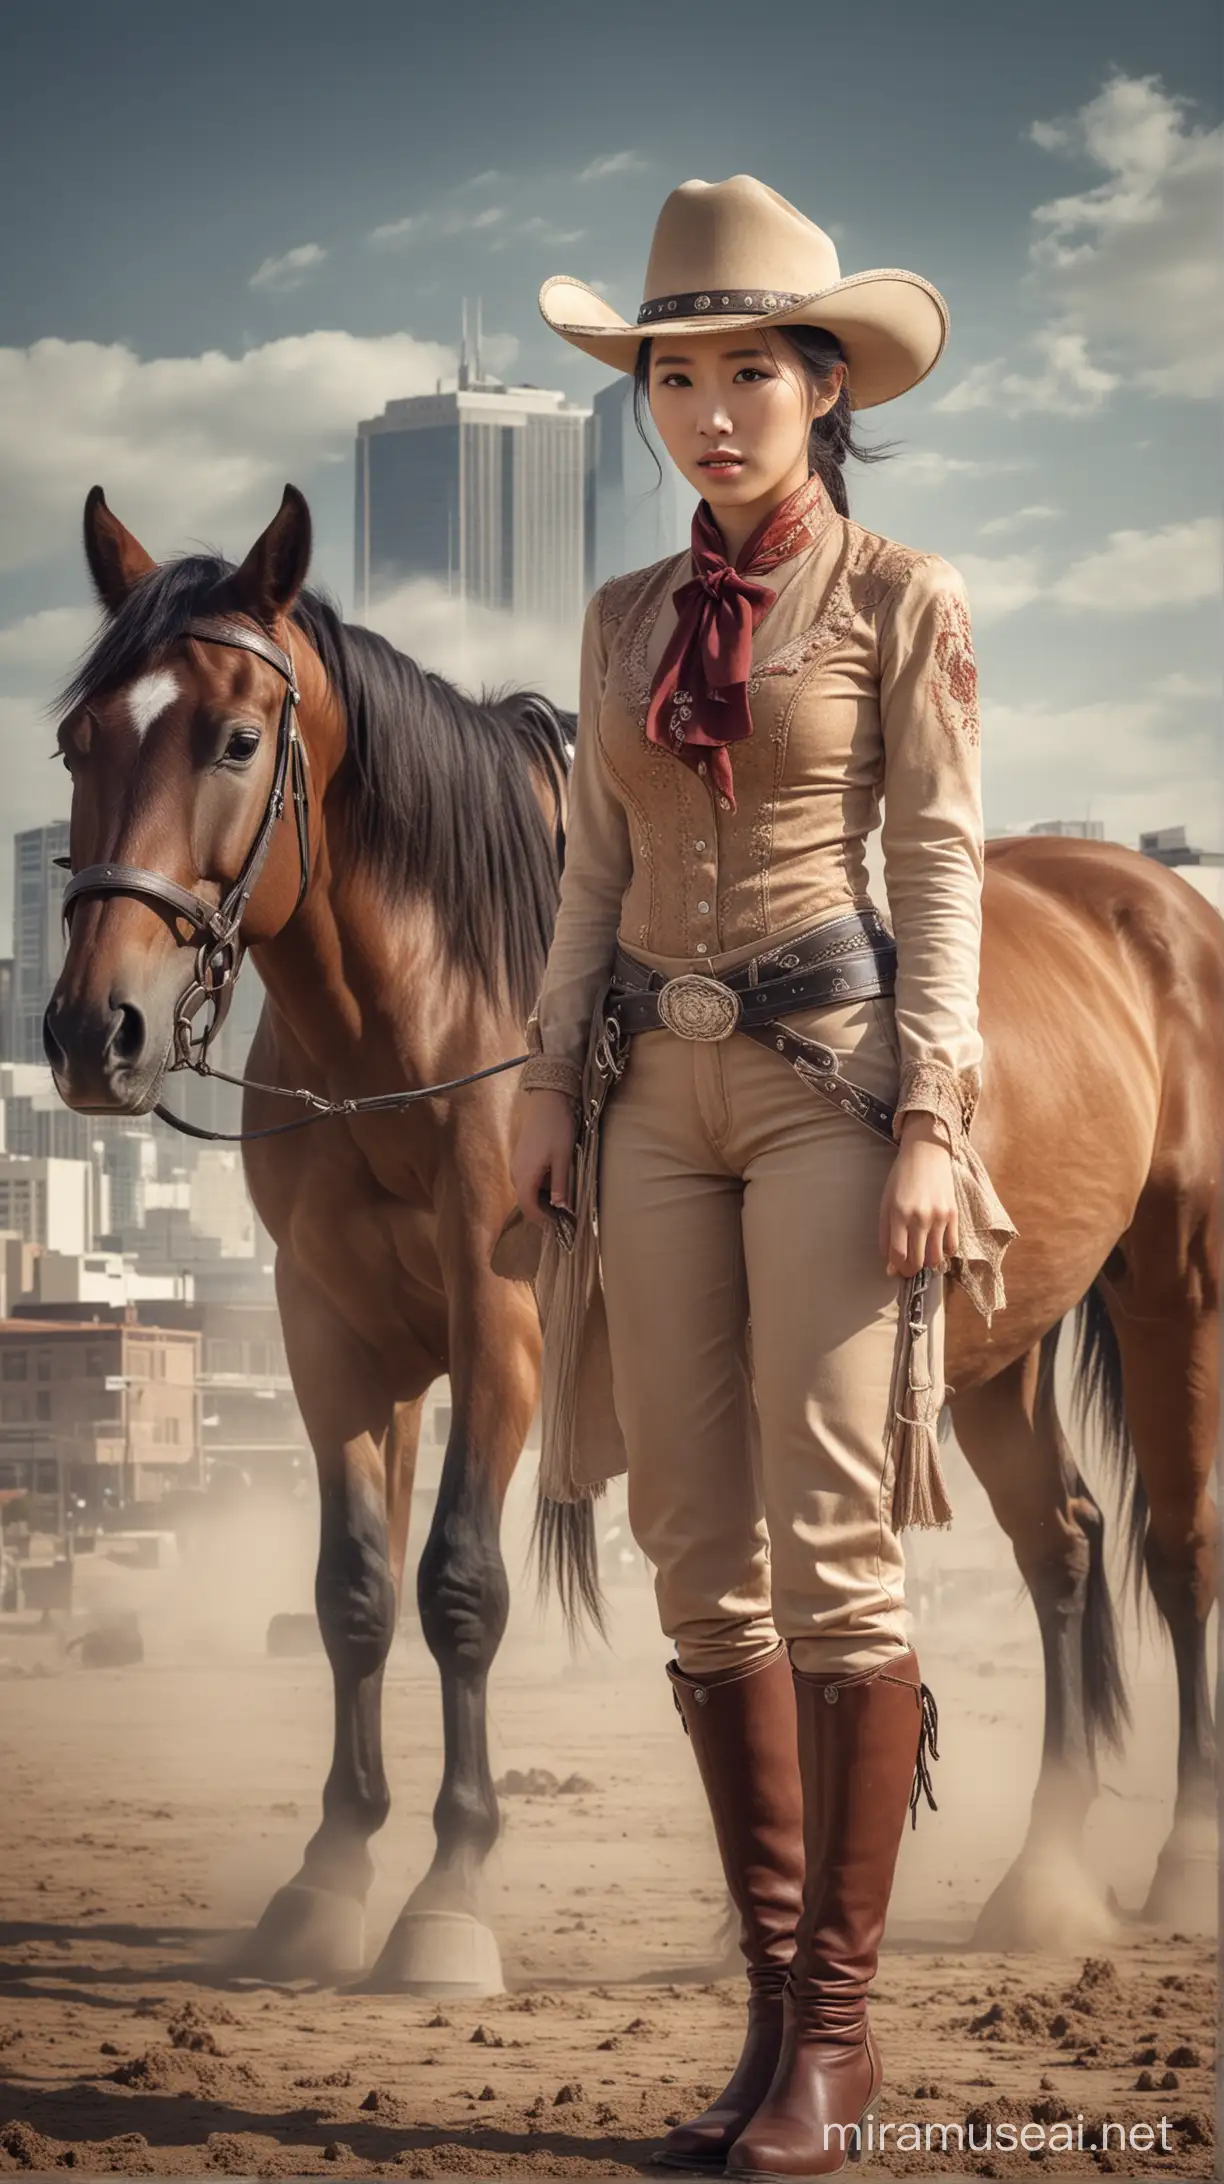 Stylish Korean Cowgirl Poses with Horse against Texas Cityscape in Ultra HDR